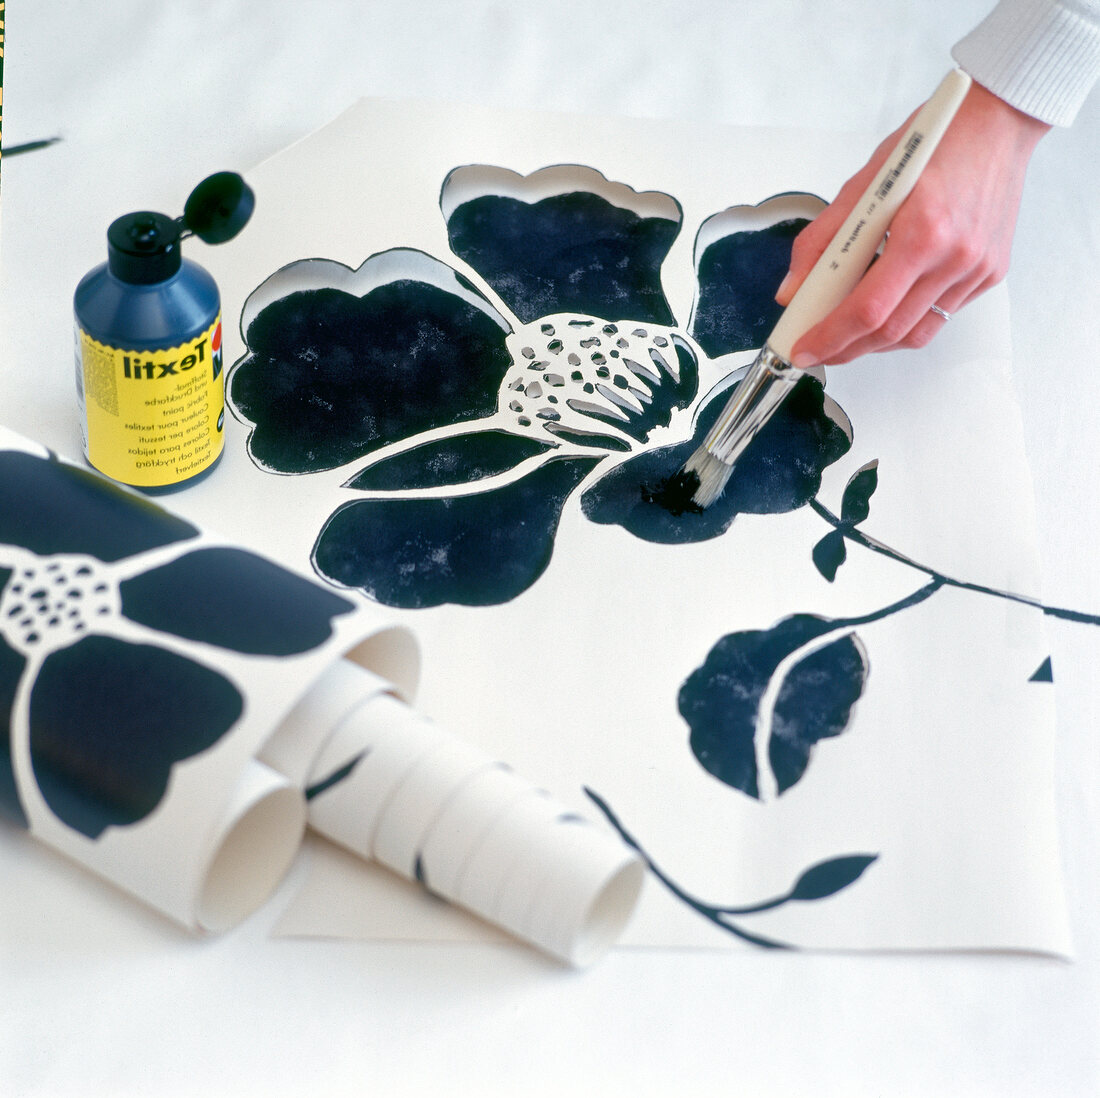 Painting with brush and ink on curtain using stencil